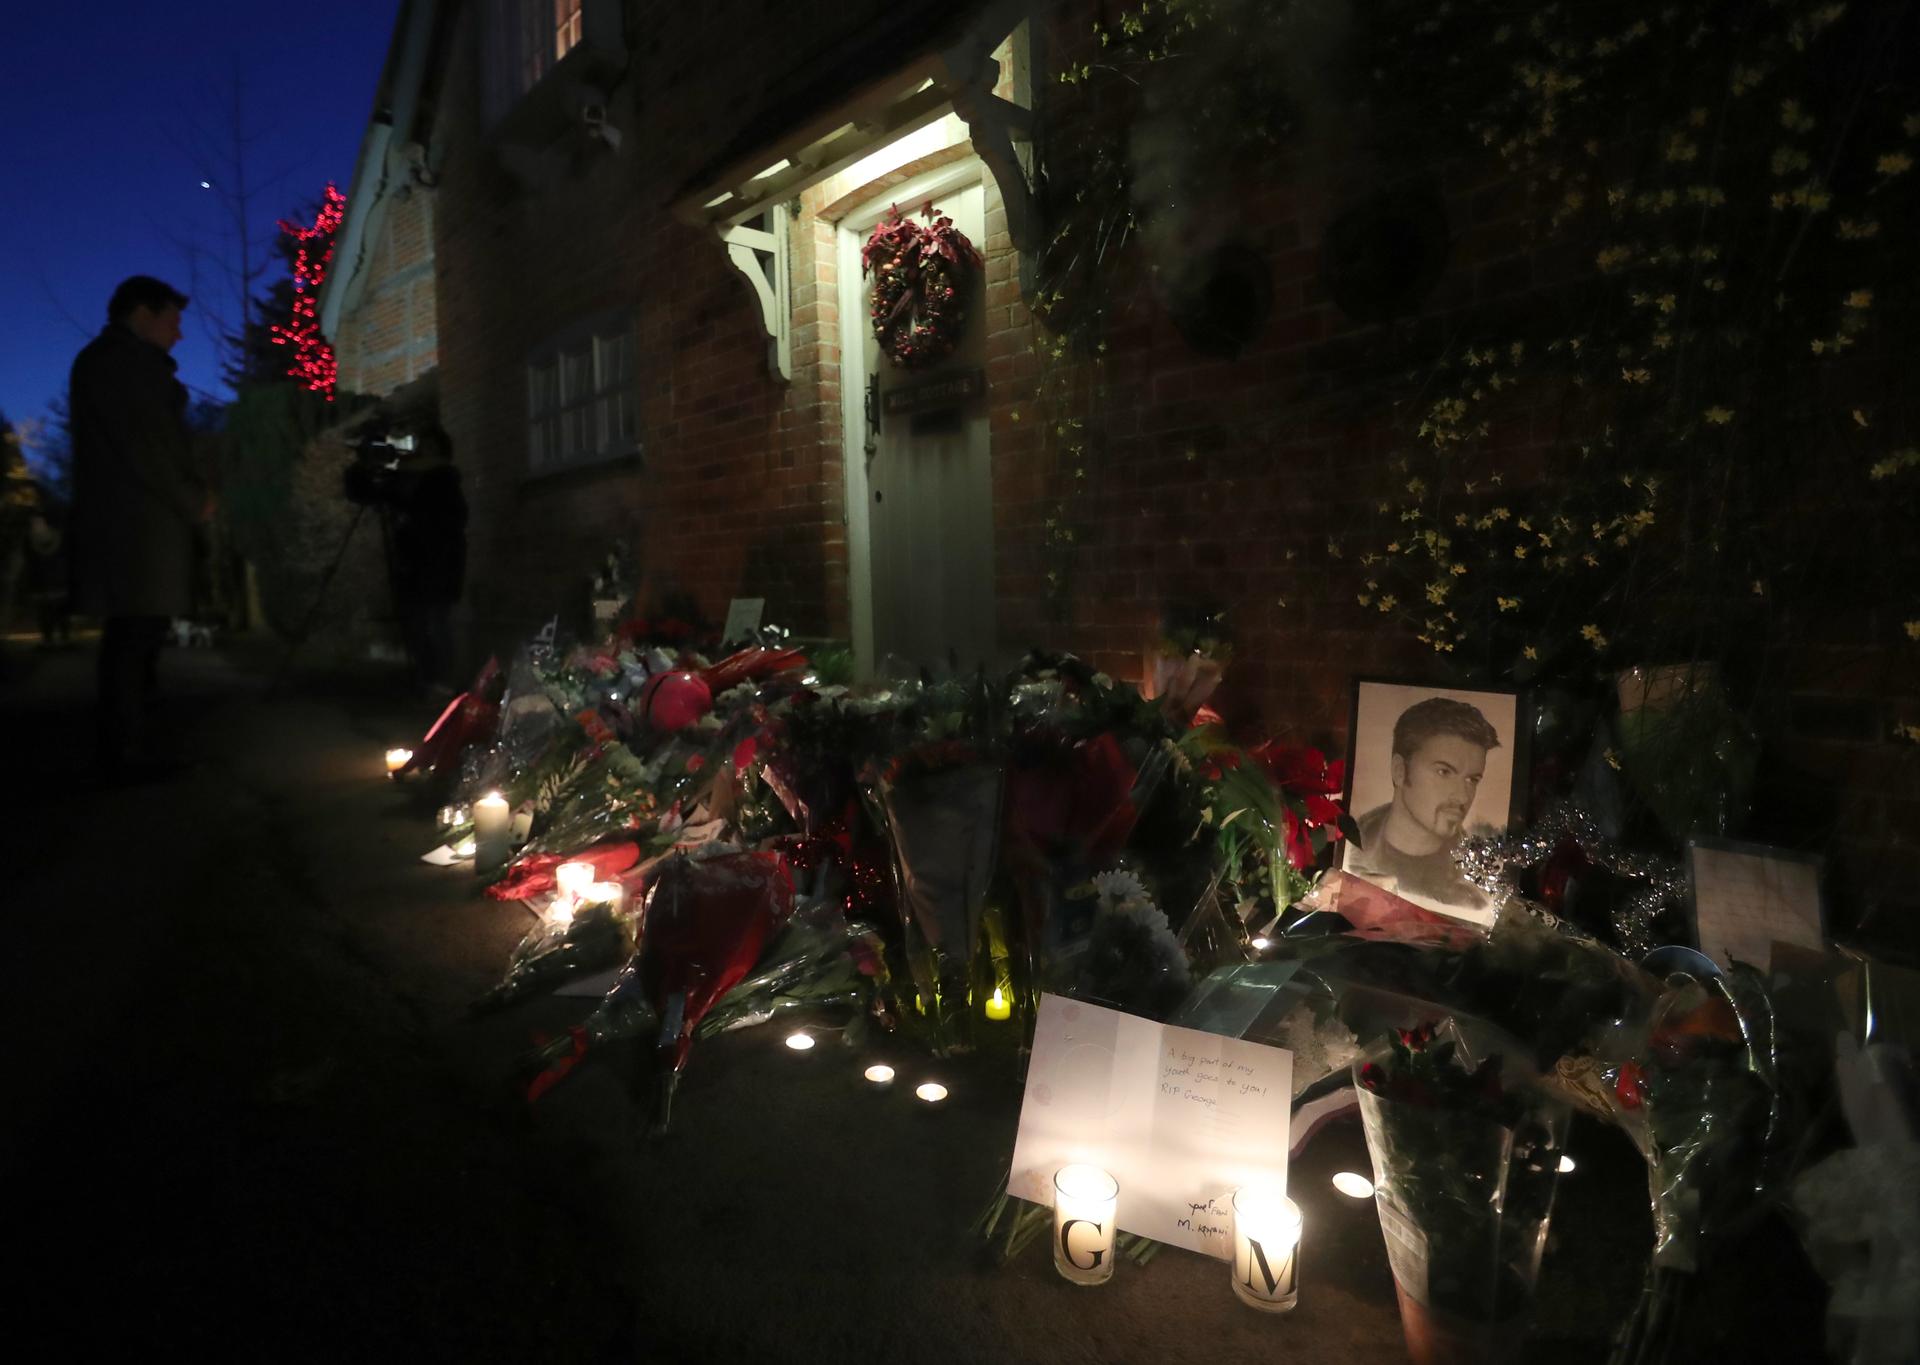 Flowers, cards and portrait of George Michael in front of brick building